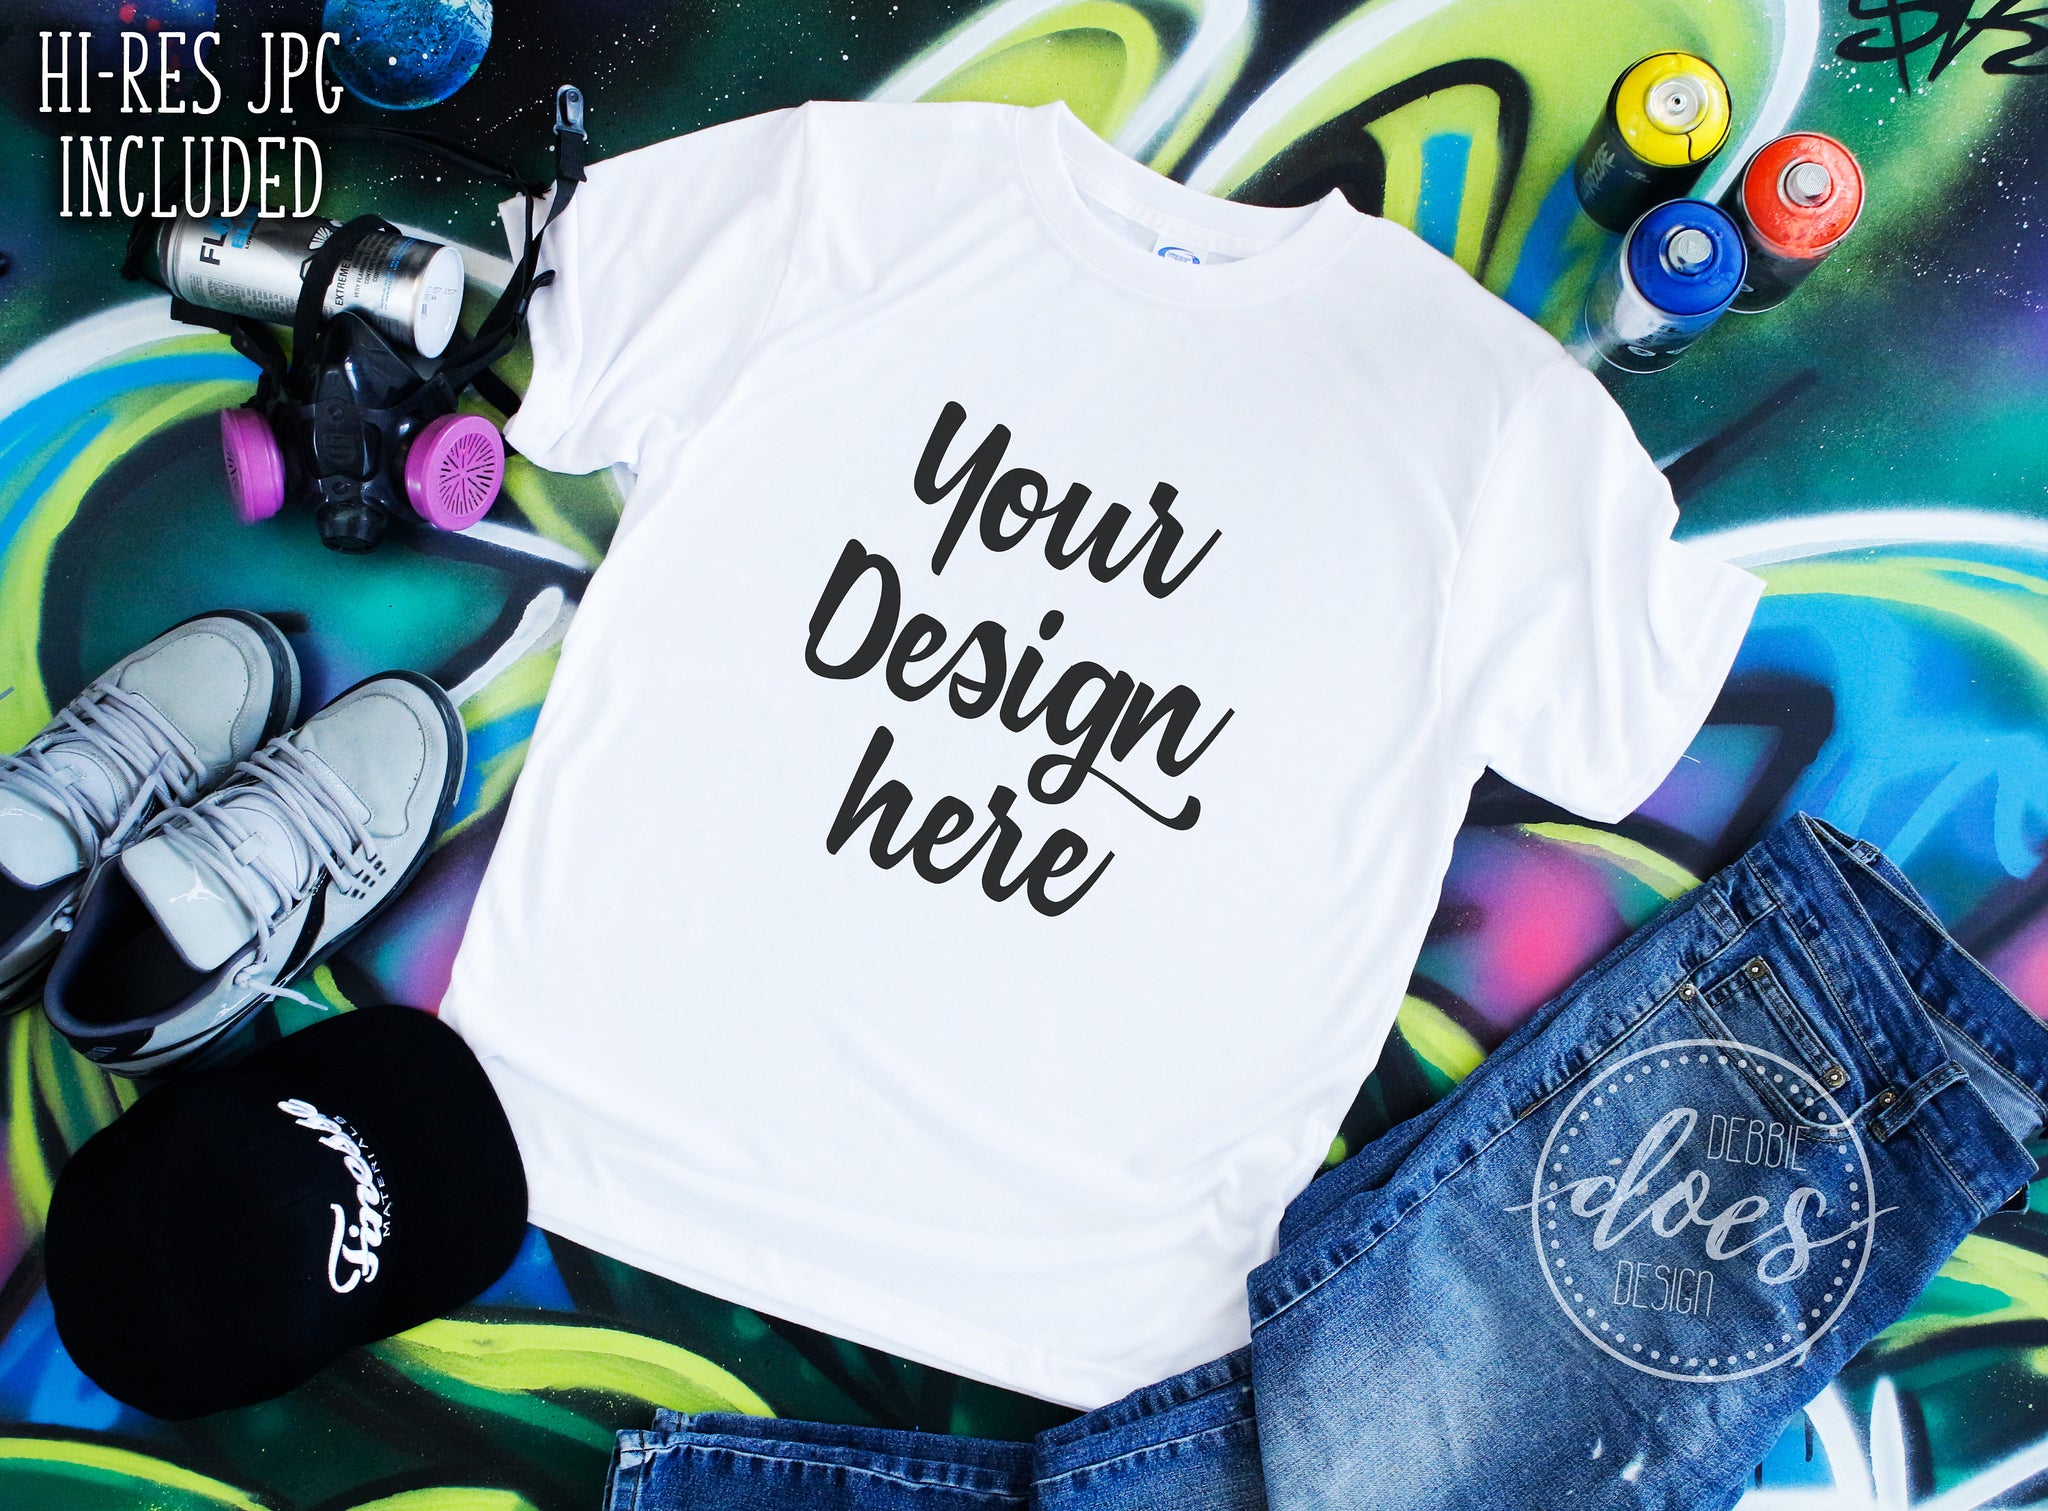 Download Graffiti Tee Shirt with Jeans Mockup | White Tee Mock-Up ...